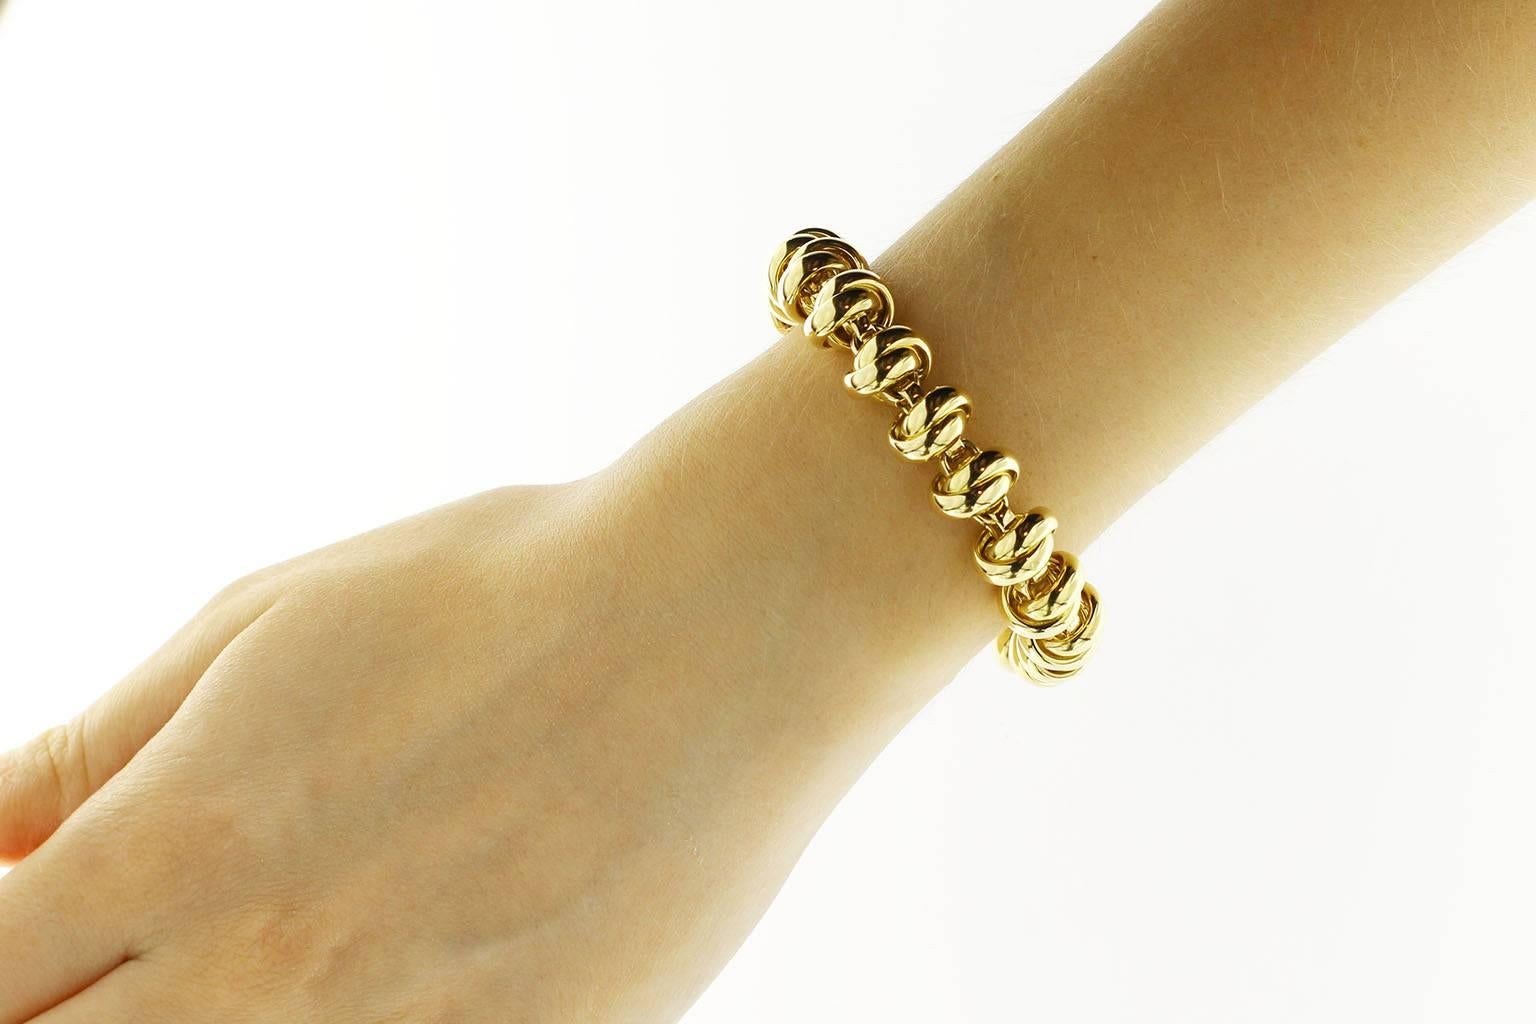 Jona design collection, hand crafted in Italy, 18 karat yellow gold 18cm.- 7 in. long link bracelet.
All Jona jewelry is new and has never been previously owned or worn. Each item will arrive at your door beautifully gift wrapped in Jona boxes, put